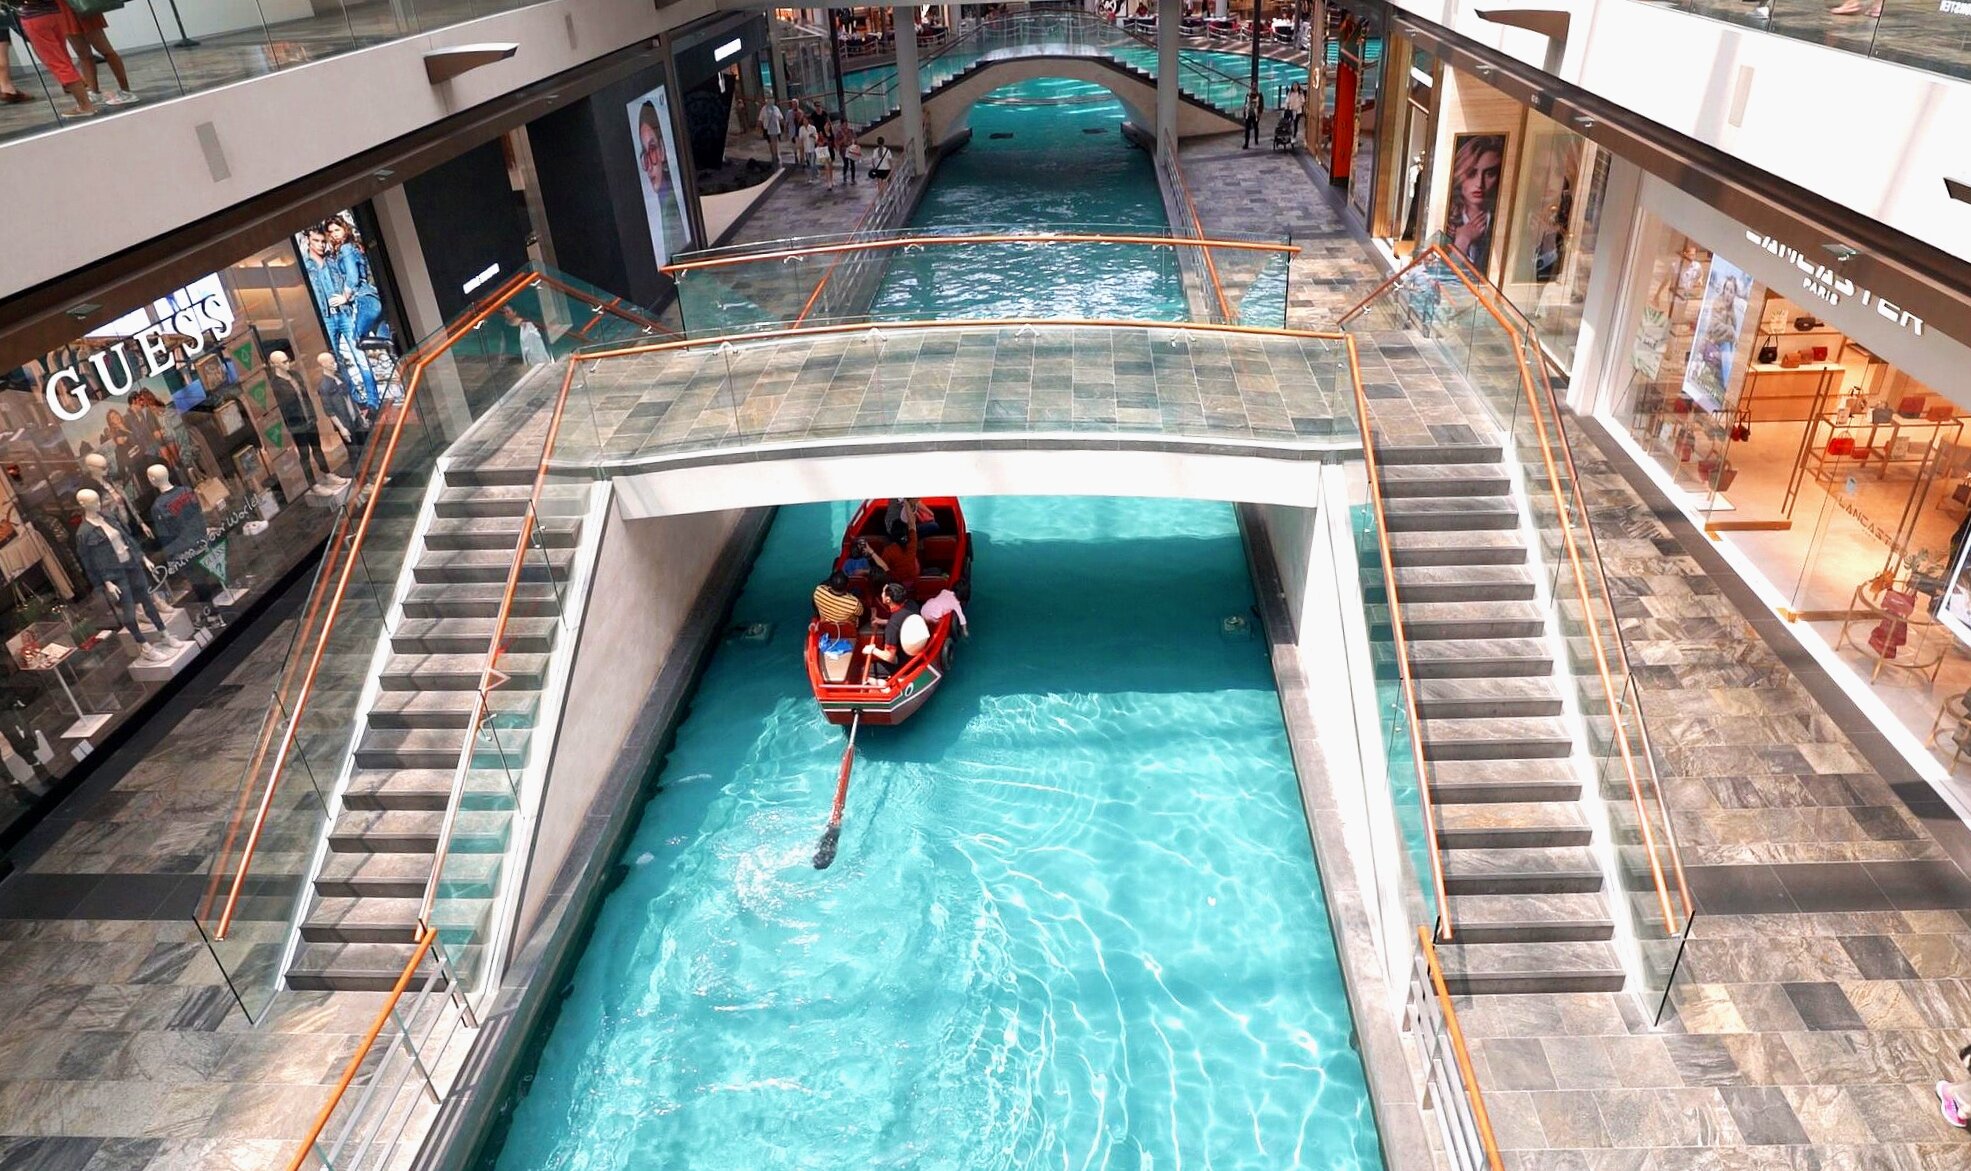 The malls indoor canal. 